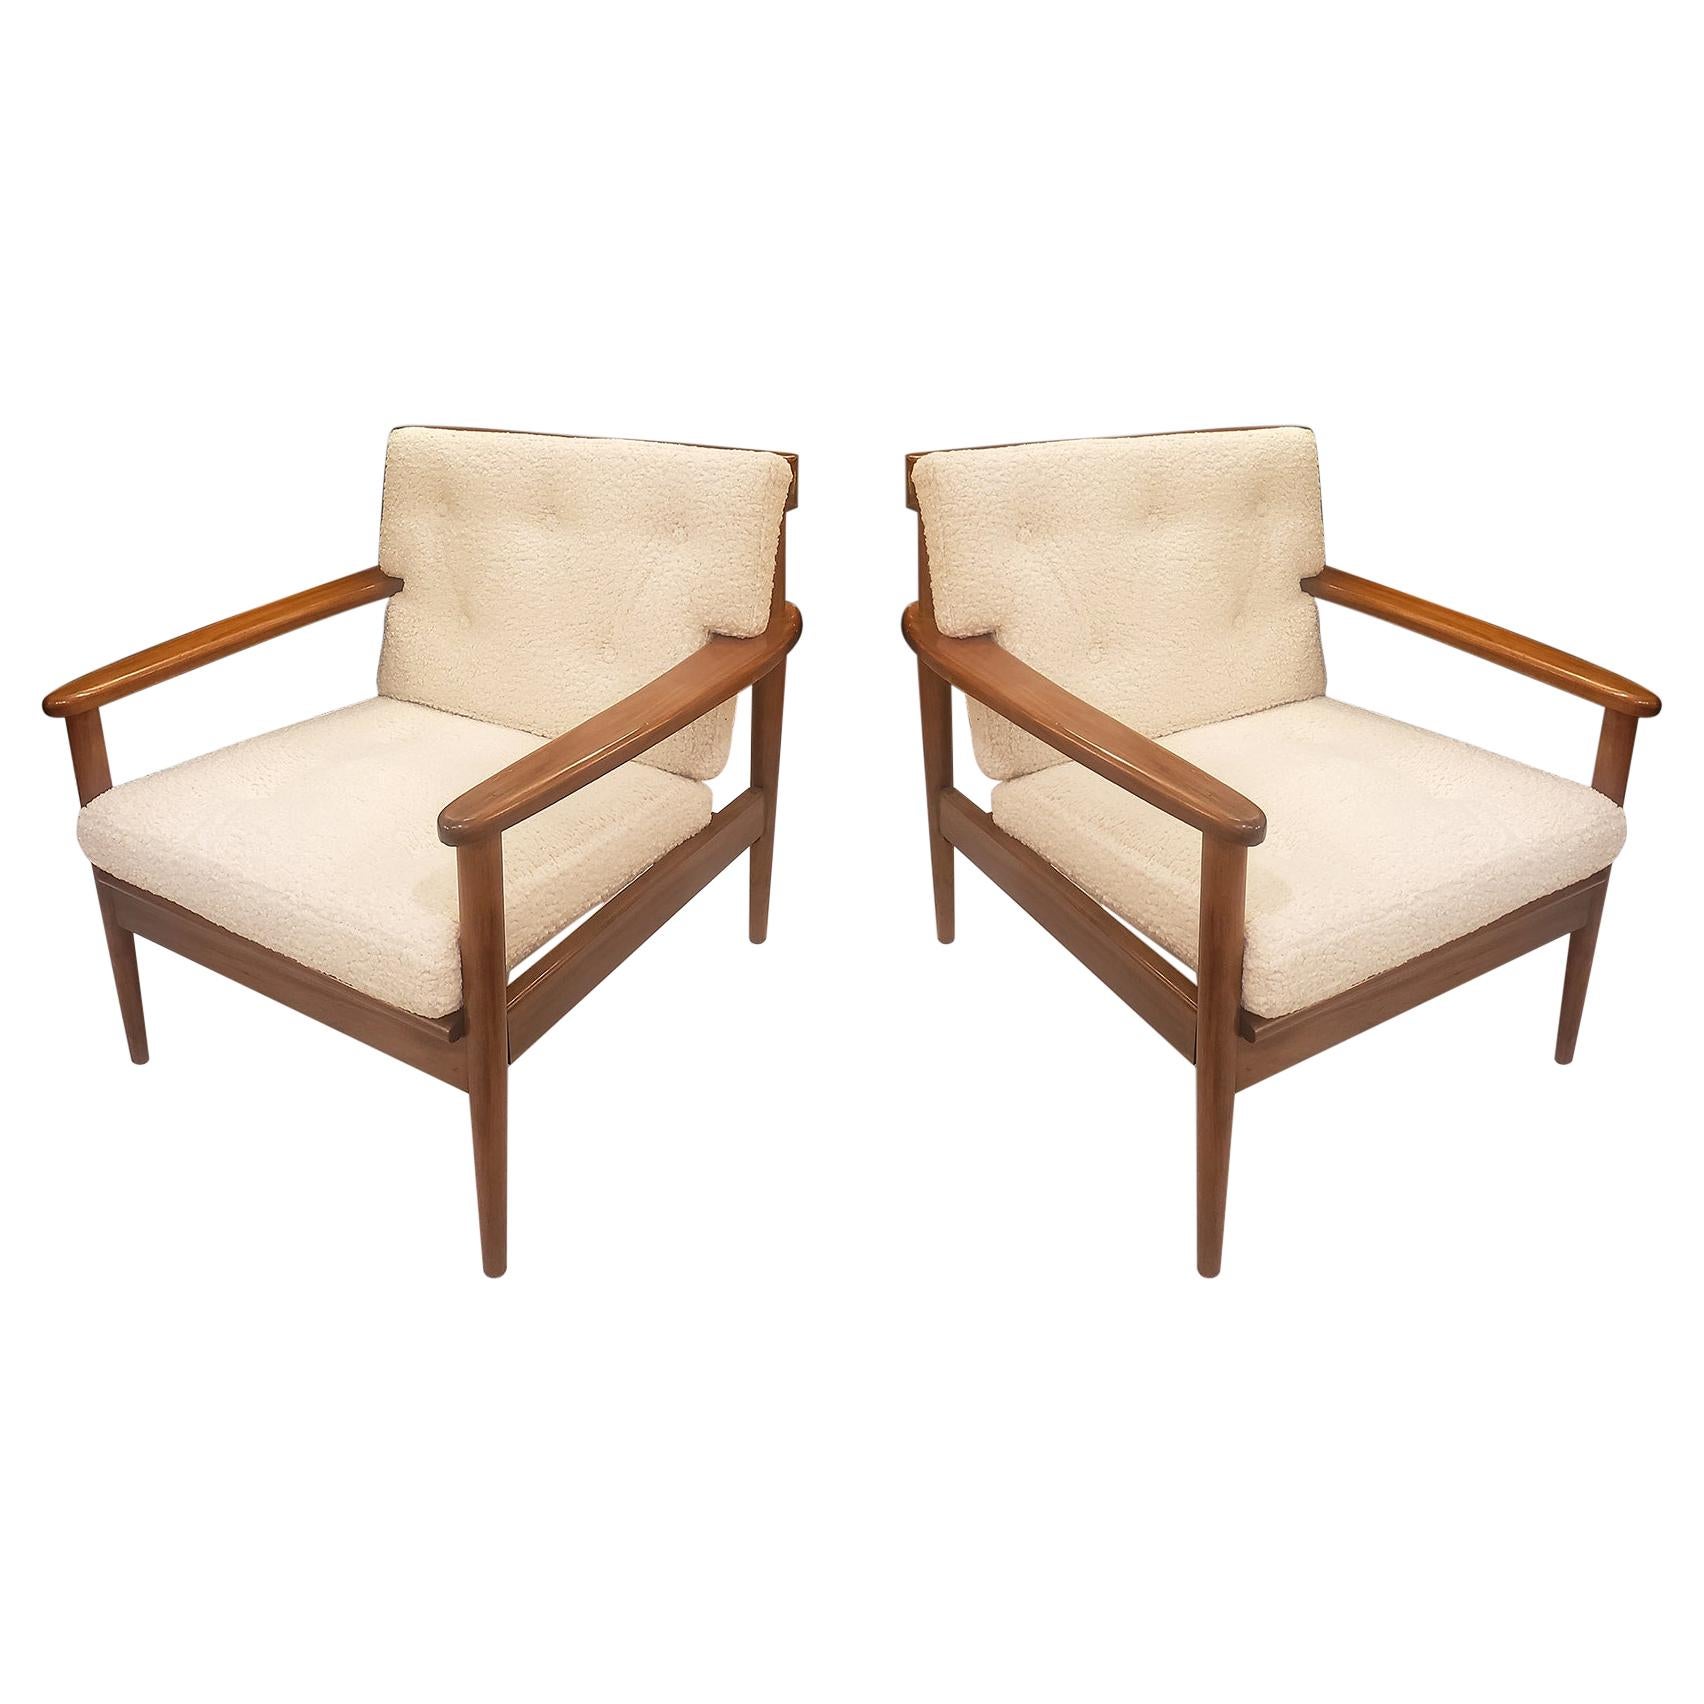 Pair of Scandinavian Mid-Century Lounge Chairs Upholstered in Boucle Fabric